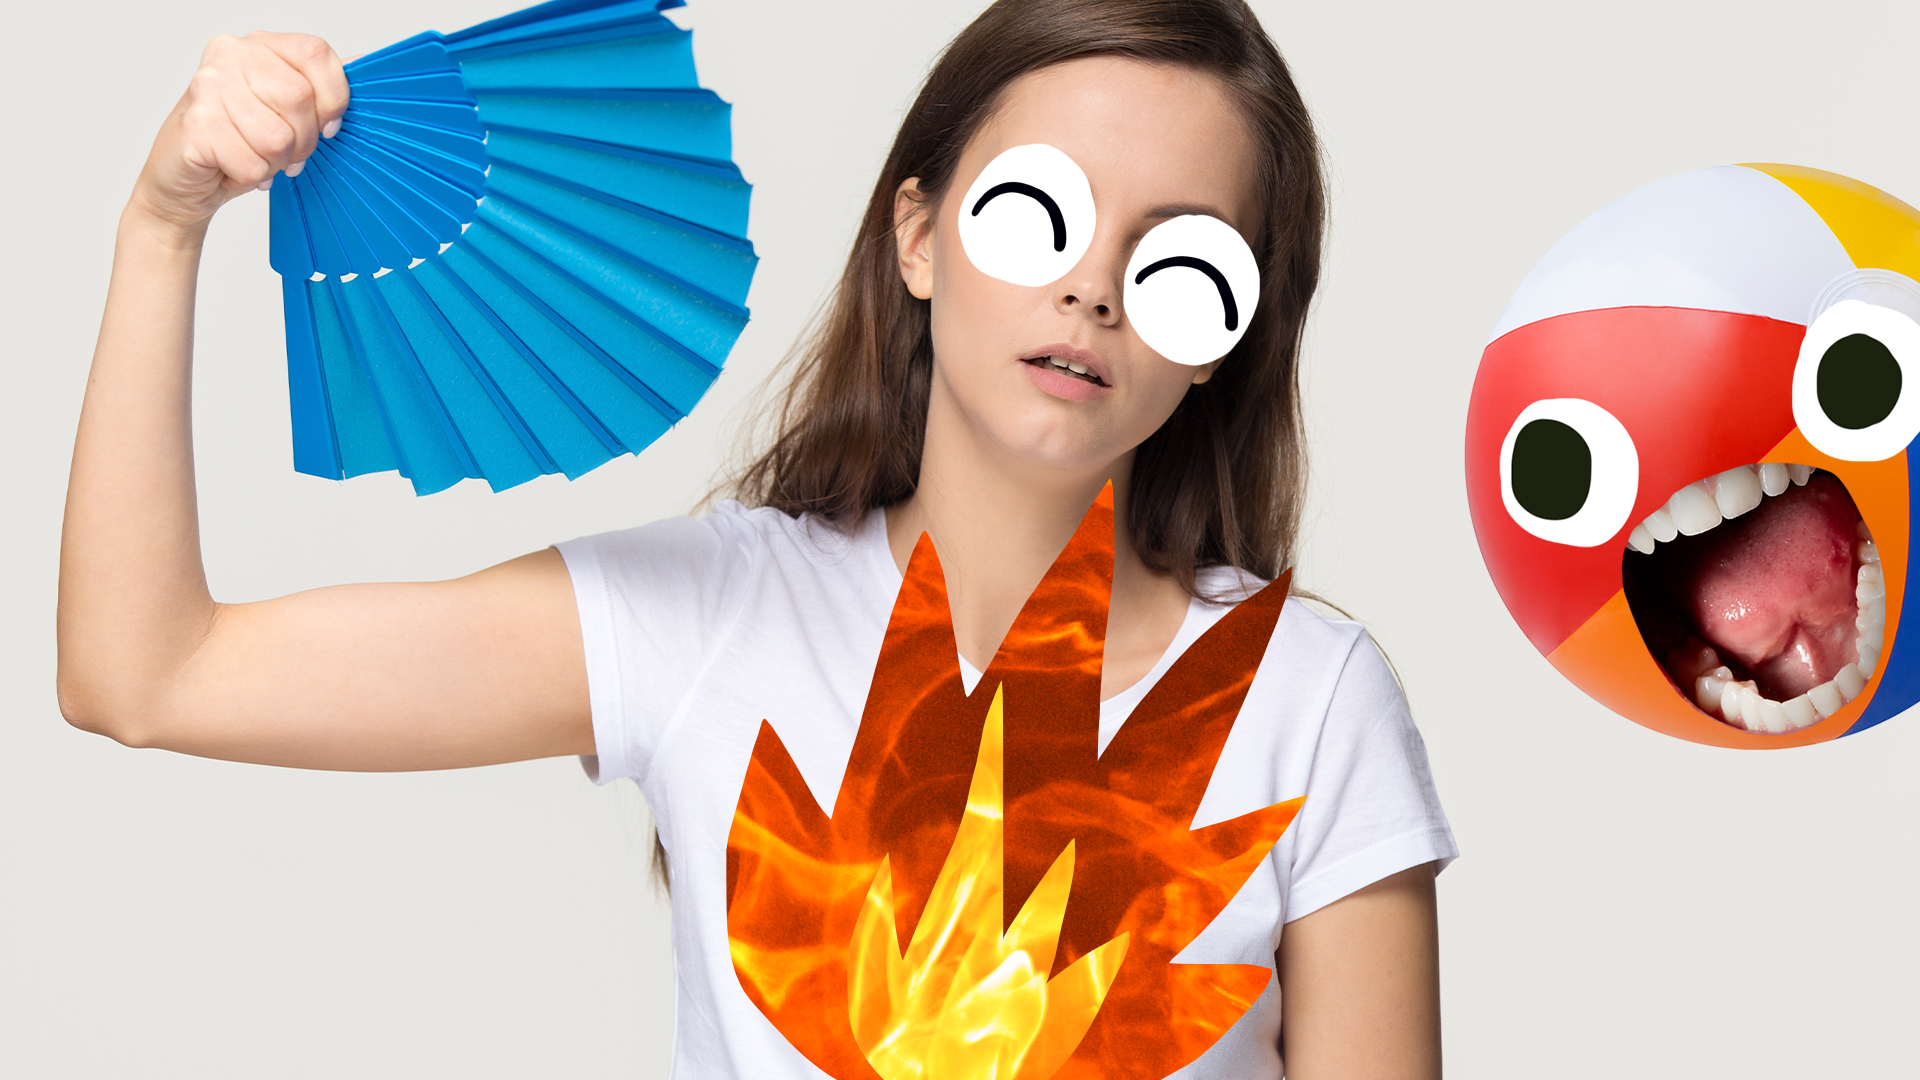 Woman fanning herself on white background with cartoon fire and screaming beachball